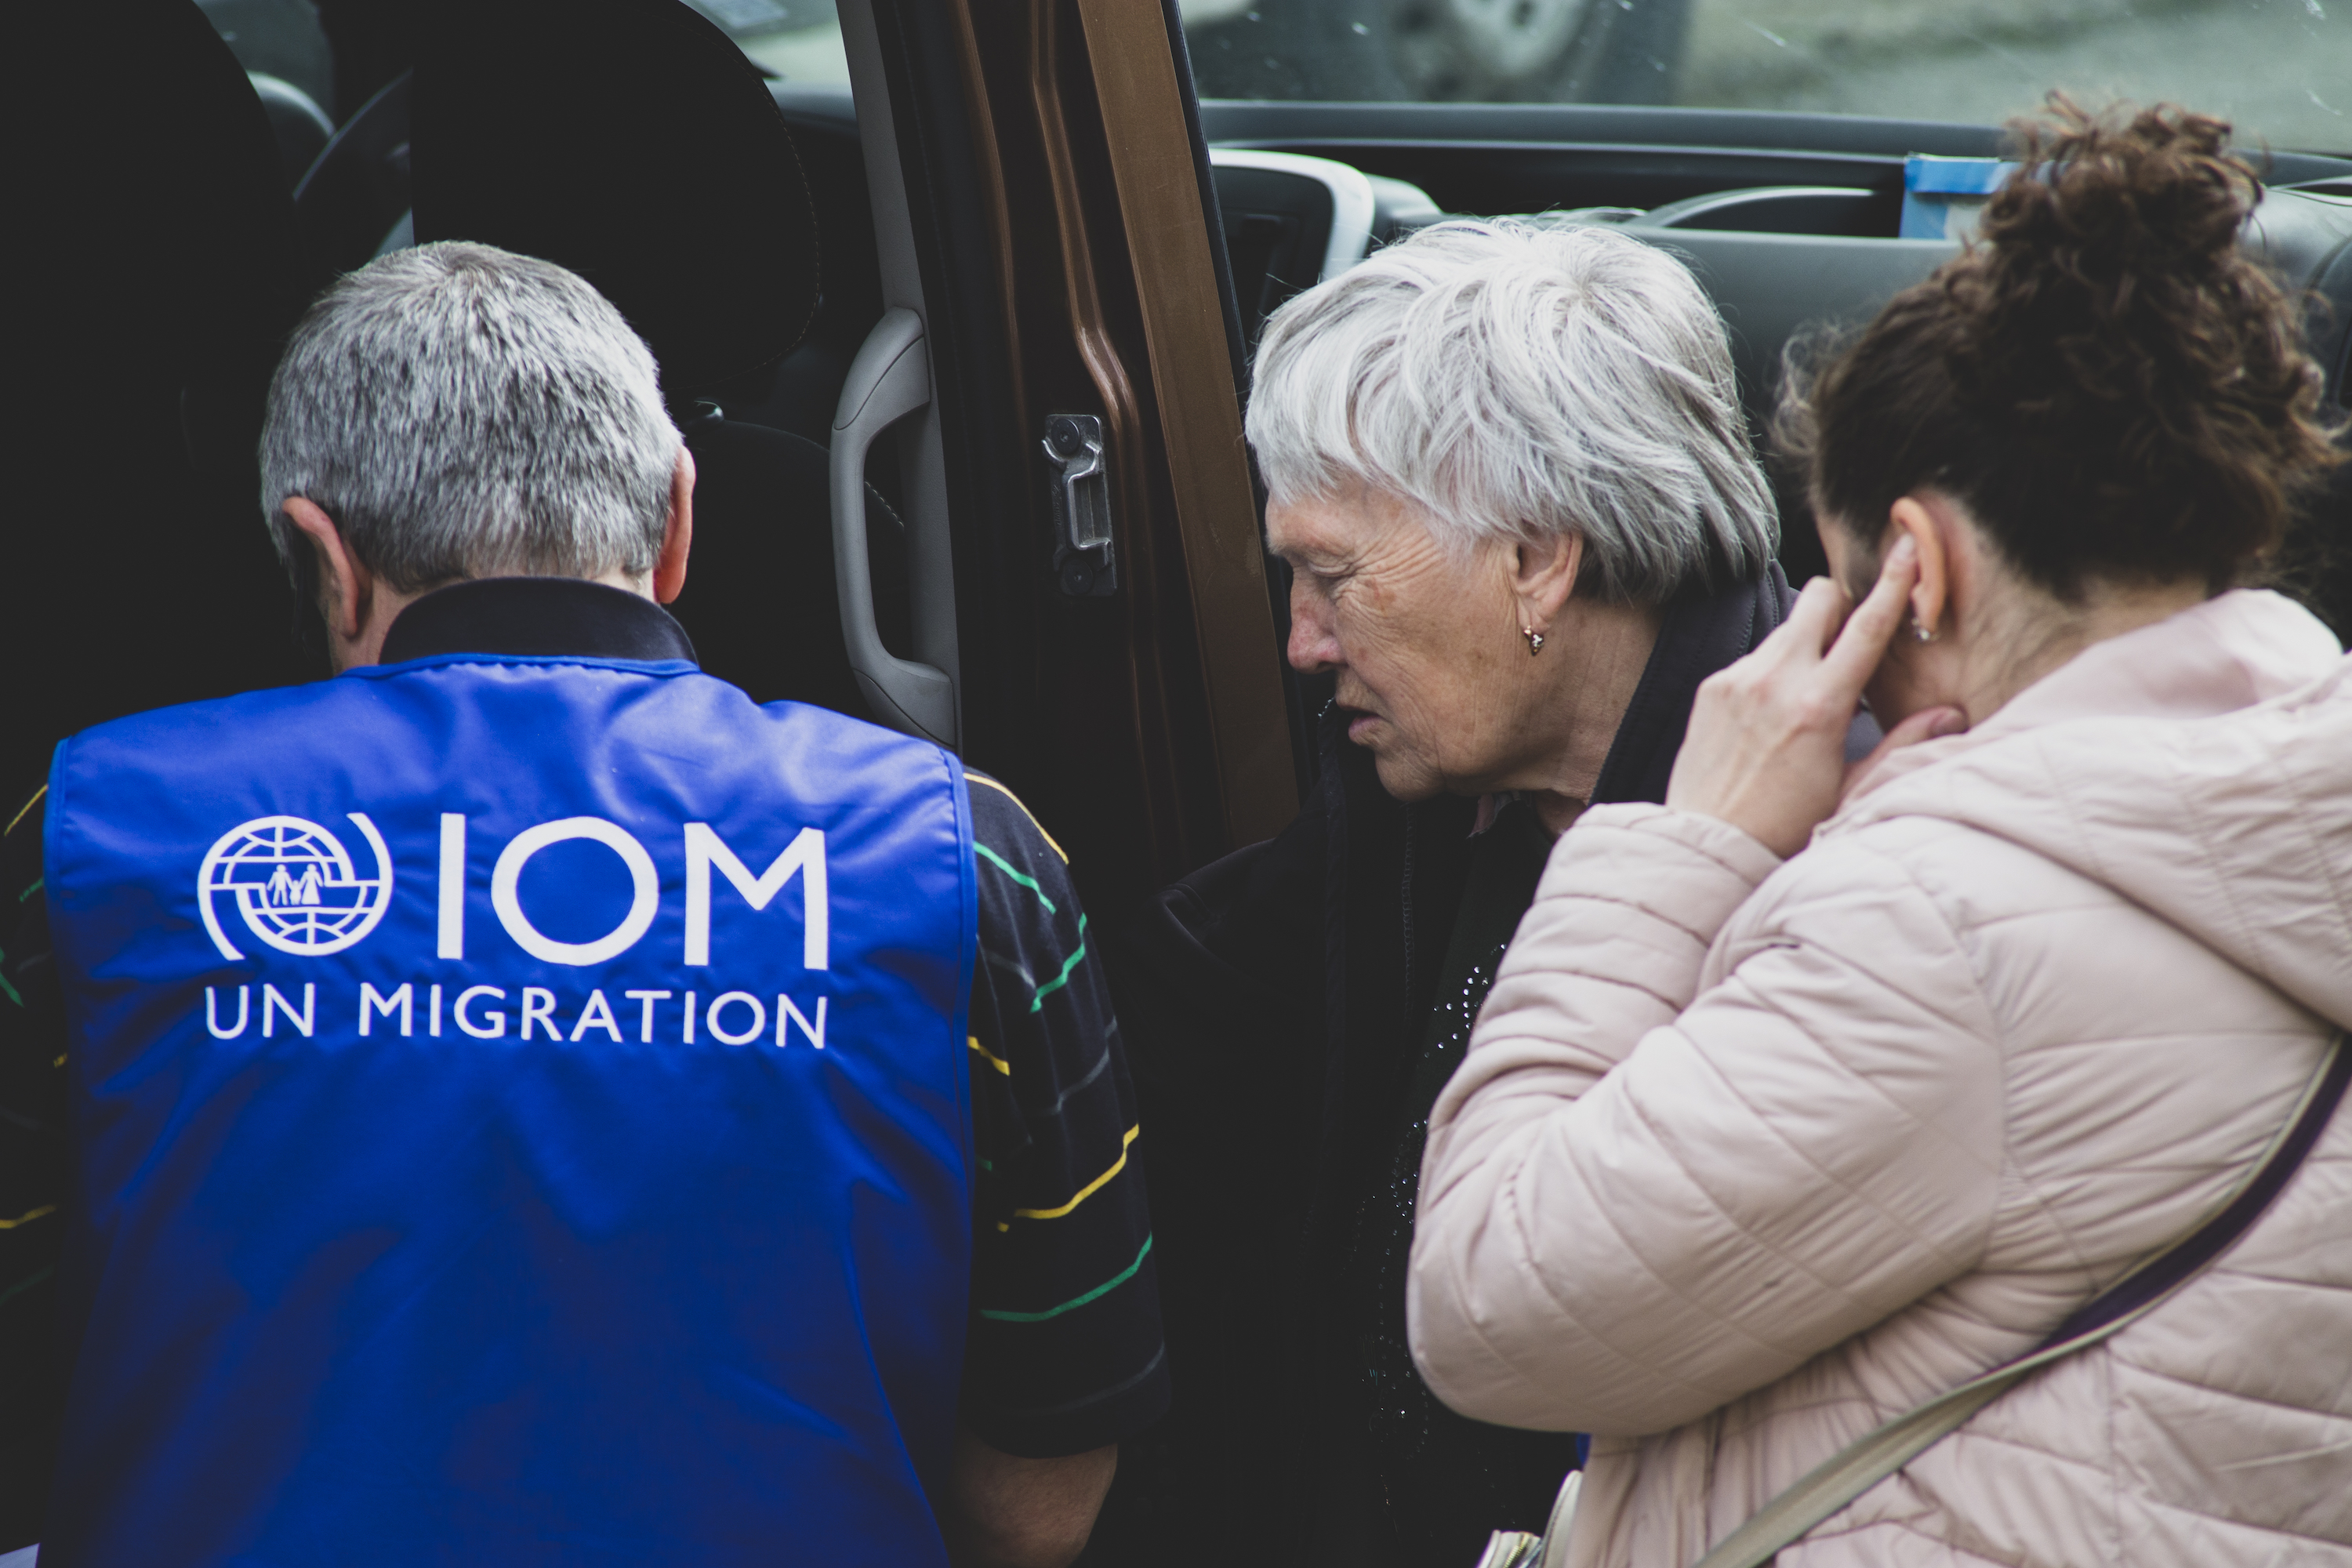 IOM staff and an elderly lady from Ukraine